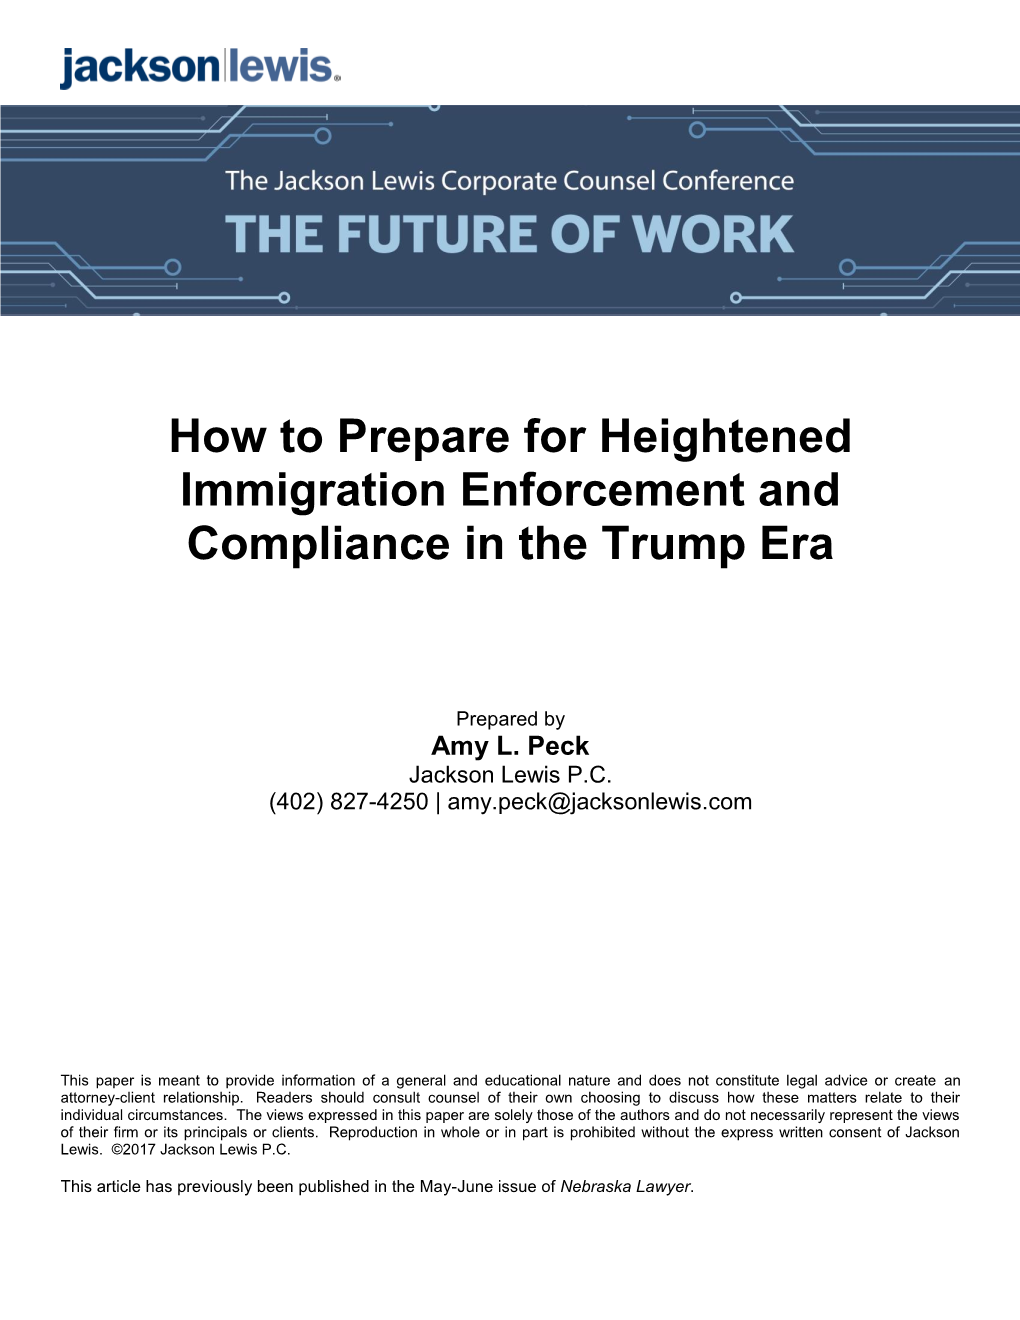 How to Prepare for Heightened Immigration Enforcement and Compliance in the Trump Era